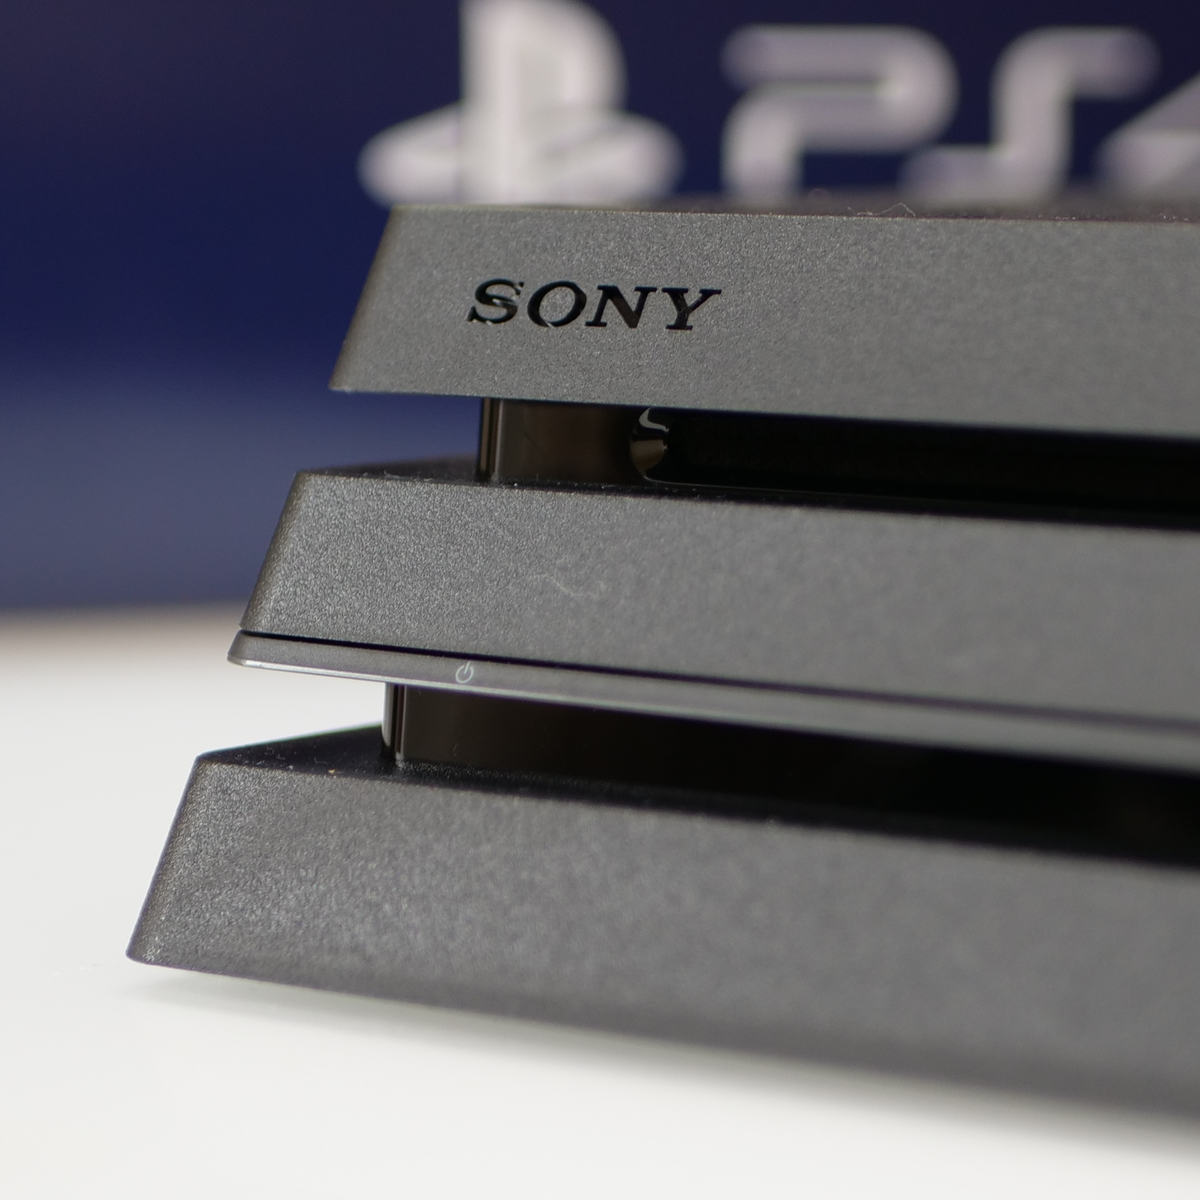 PlayStation 4 Pro CUH-7200 review: the latest, quietest hardware revision